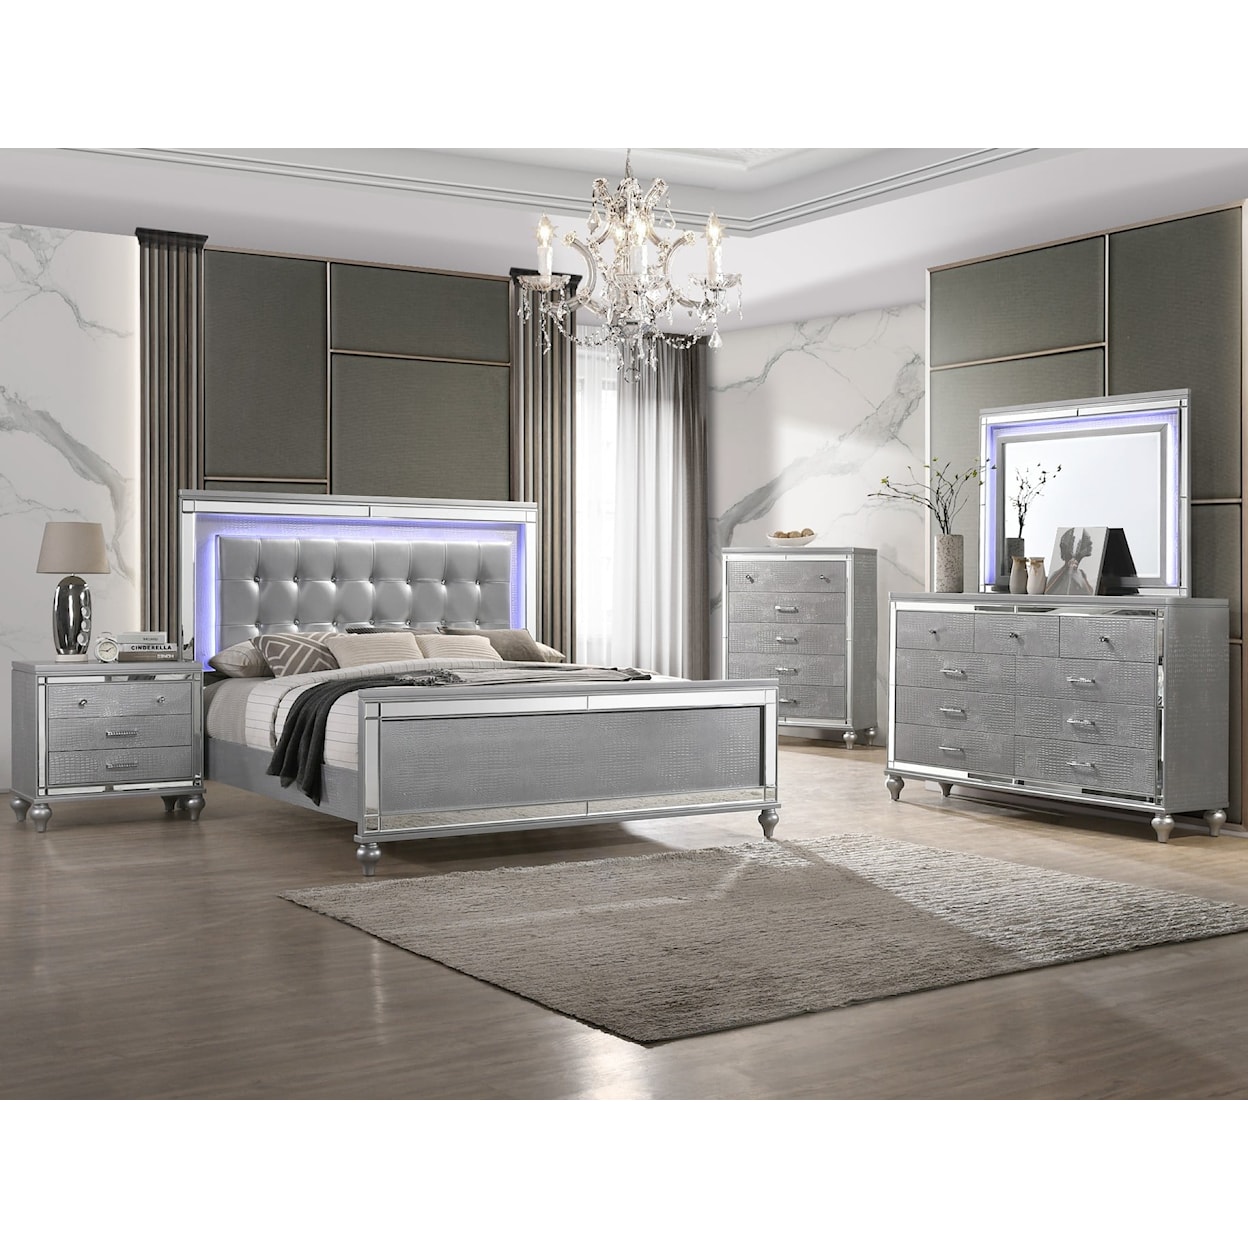 New Classic Valentino King Bed, Dresser, Mirror, Chest